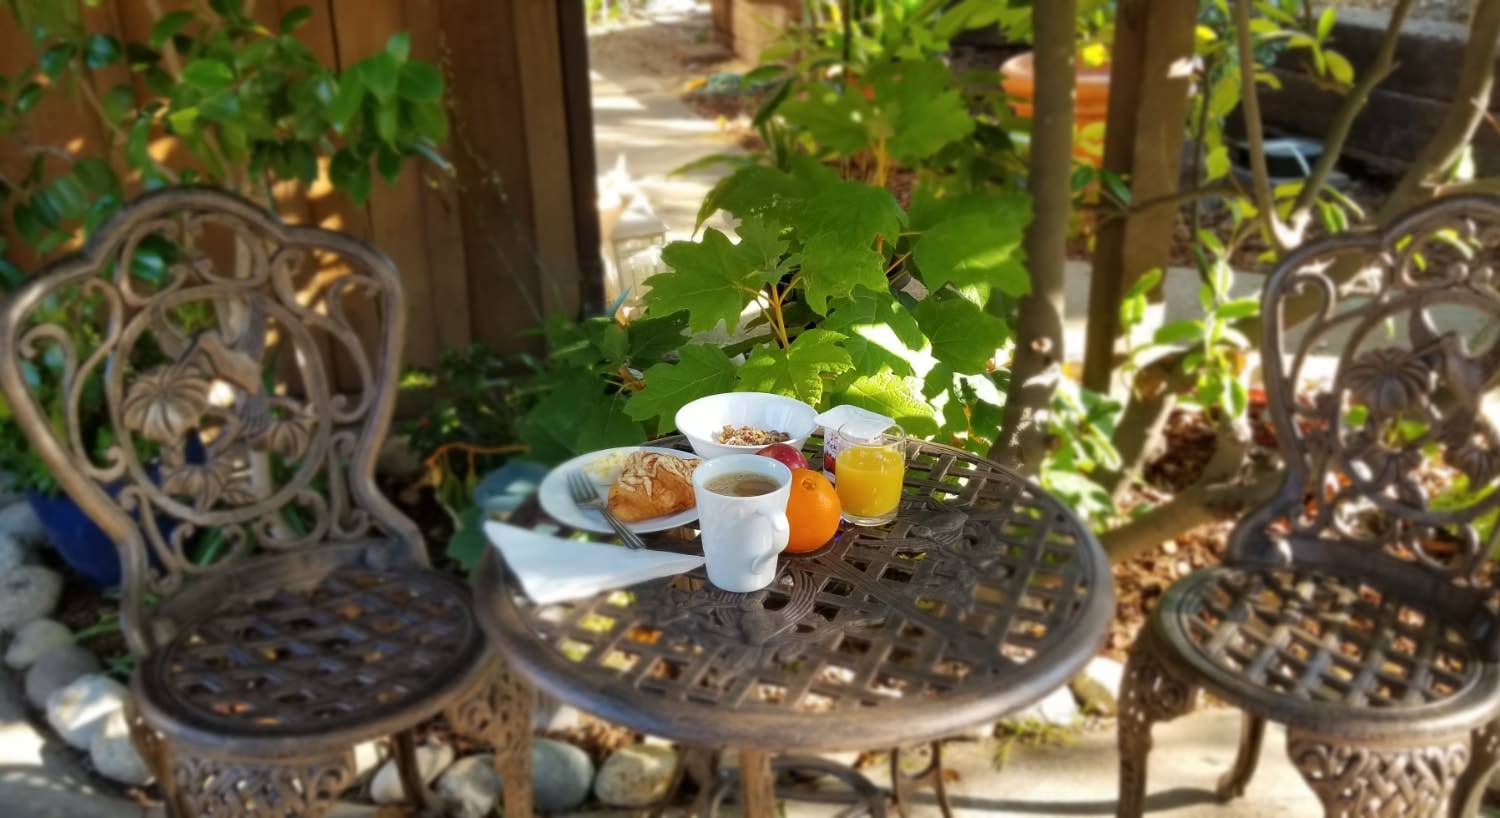 Small breakfast with a pastry, yogurt and granola, orange, apple, apple juice, and coffee in white porcelain dishes sitting on rod iron table on patio